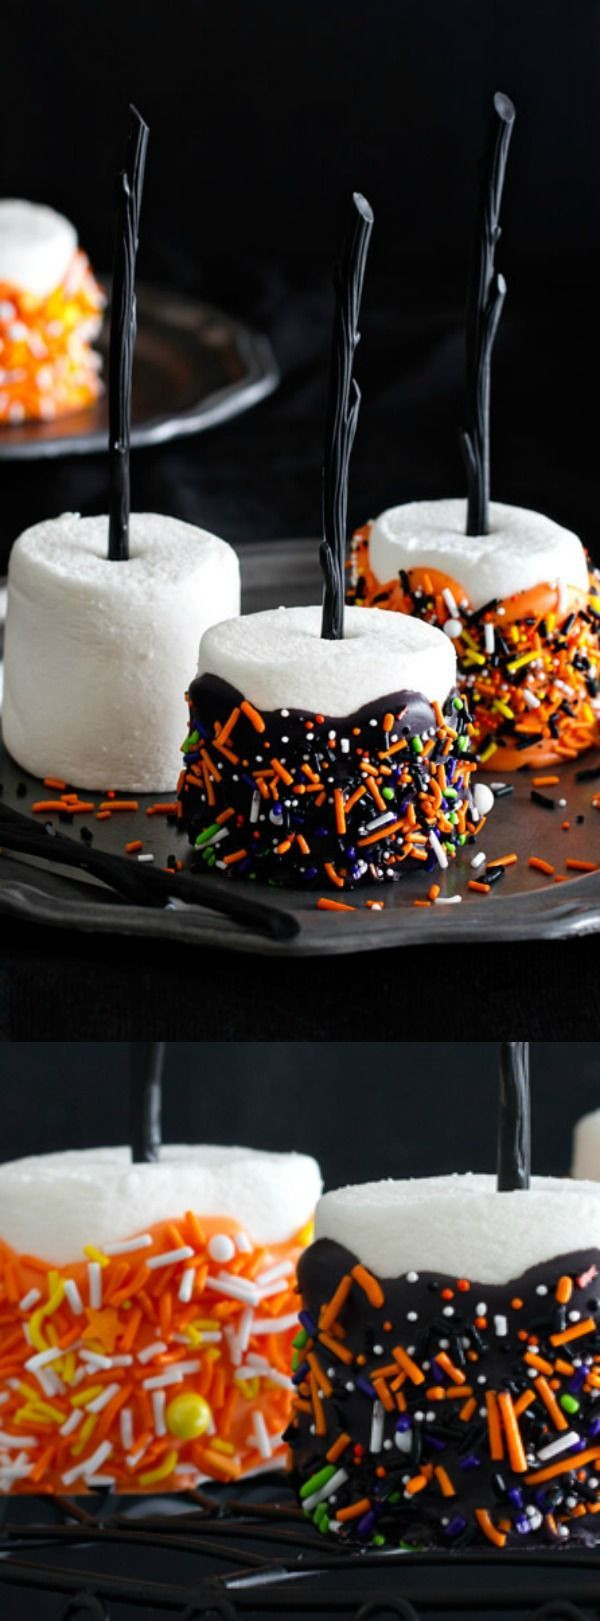 Simple Halloween Desserts
 These Halloween Marshmallow Pops from My Baking Addiction